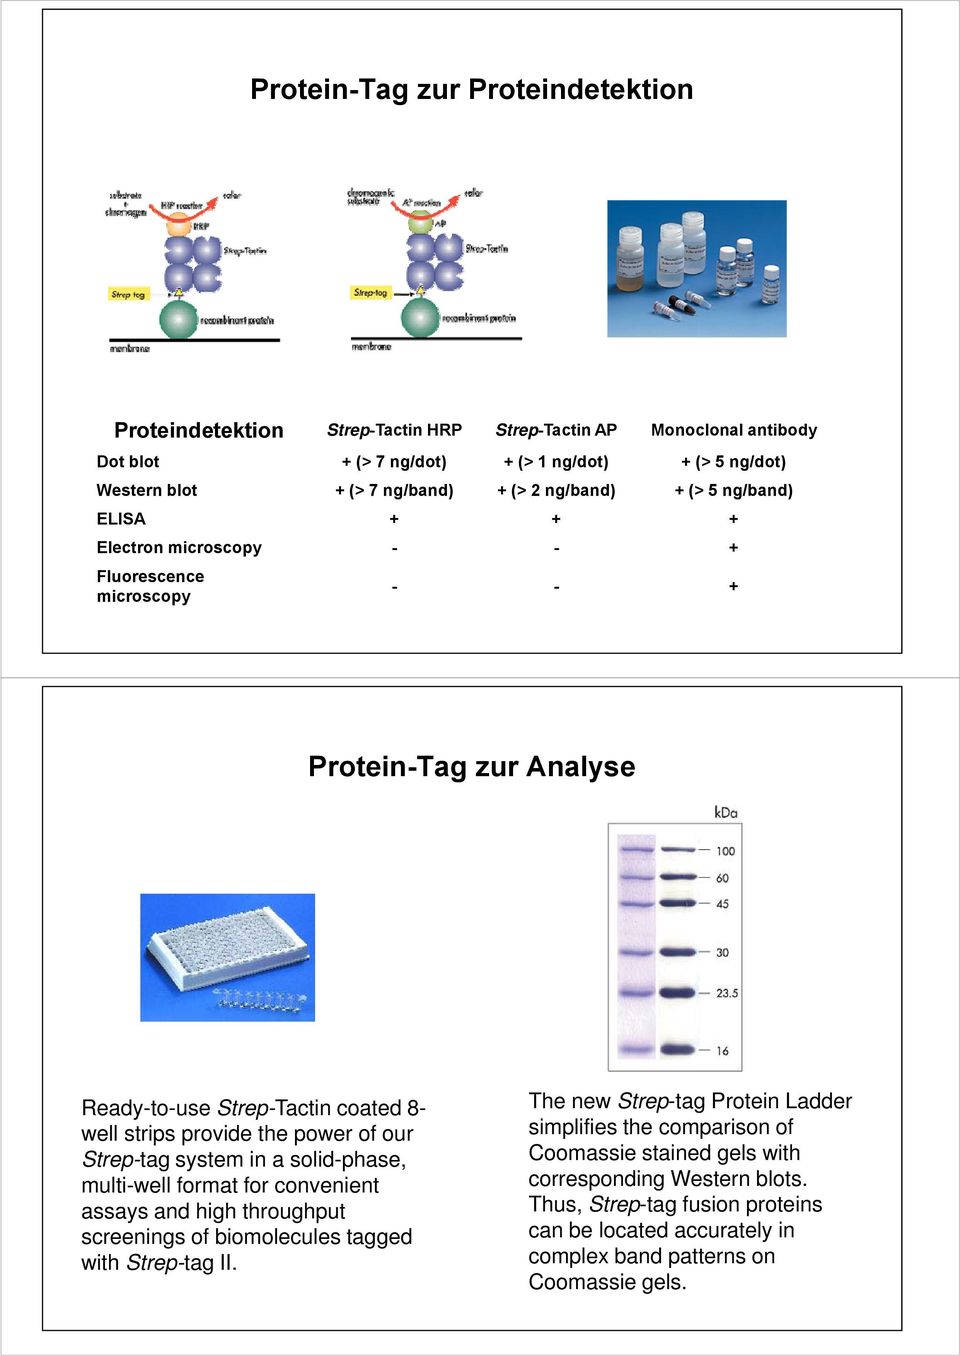 of our Strep-tag system in a solid-phase, multi-well format for convenient assays and high throughput screenings of biomolecules tagged with Strep-tag II.